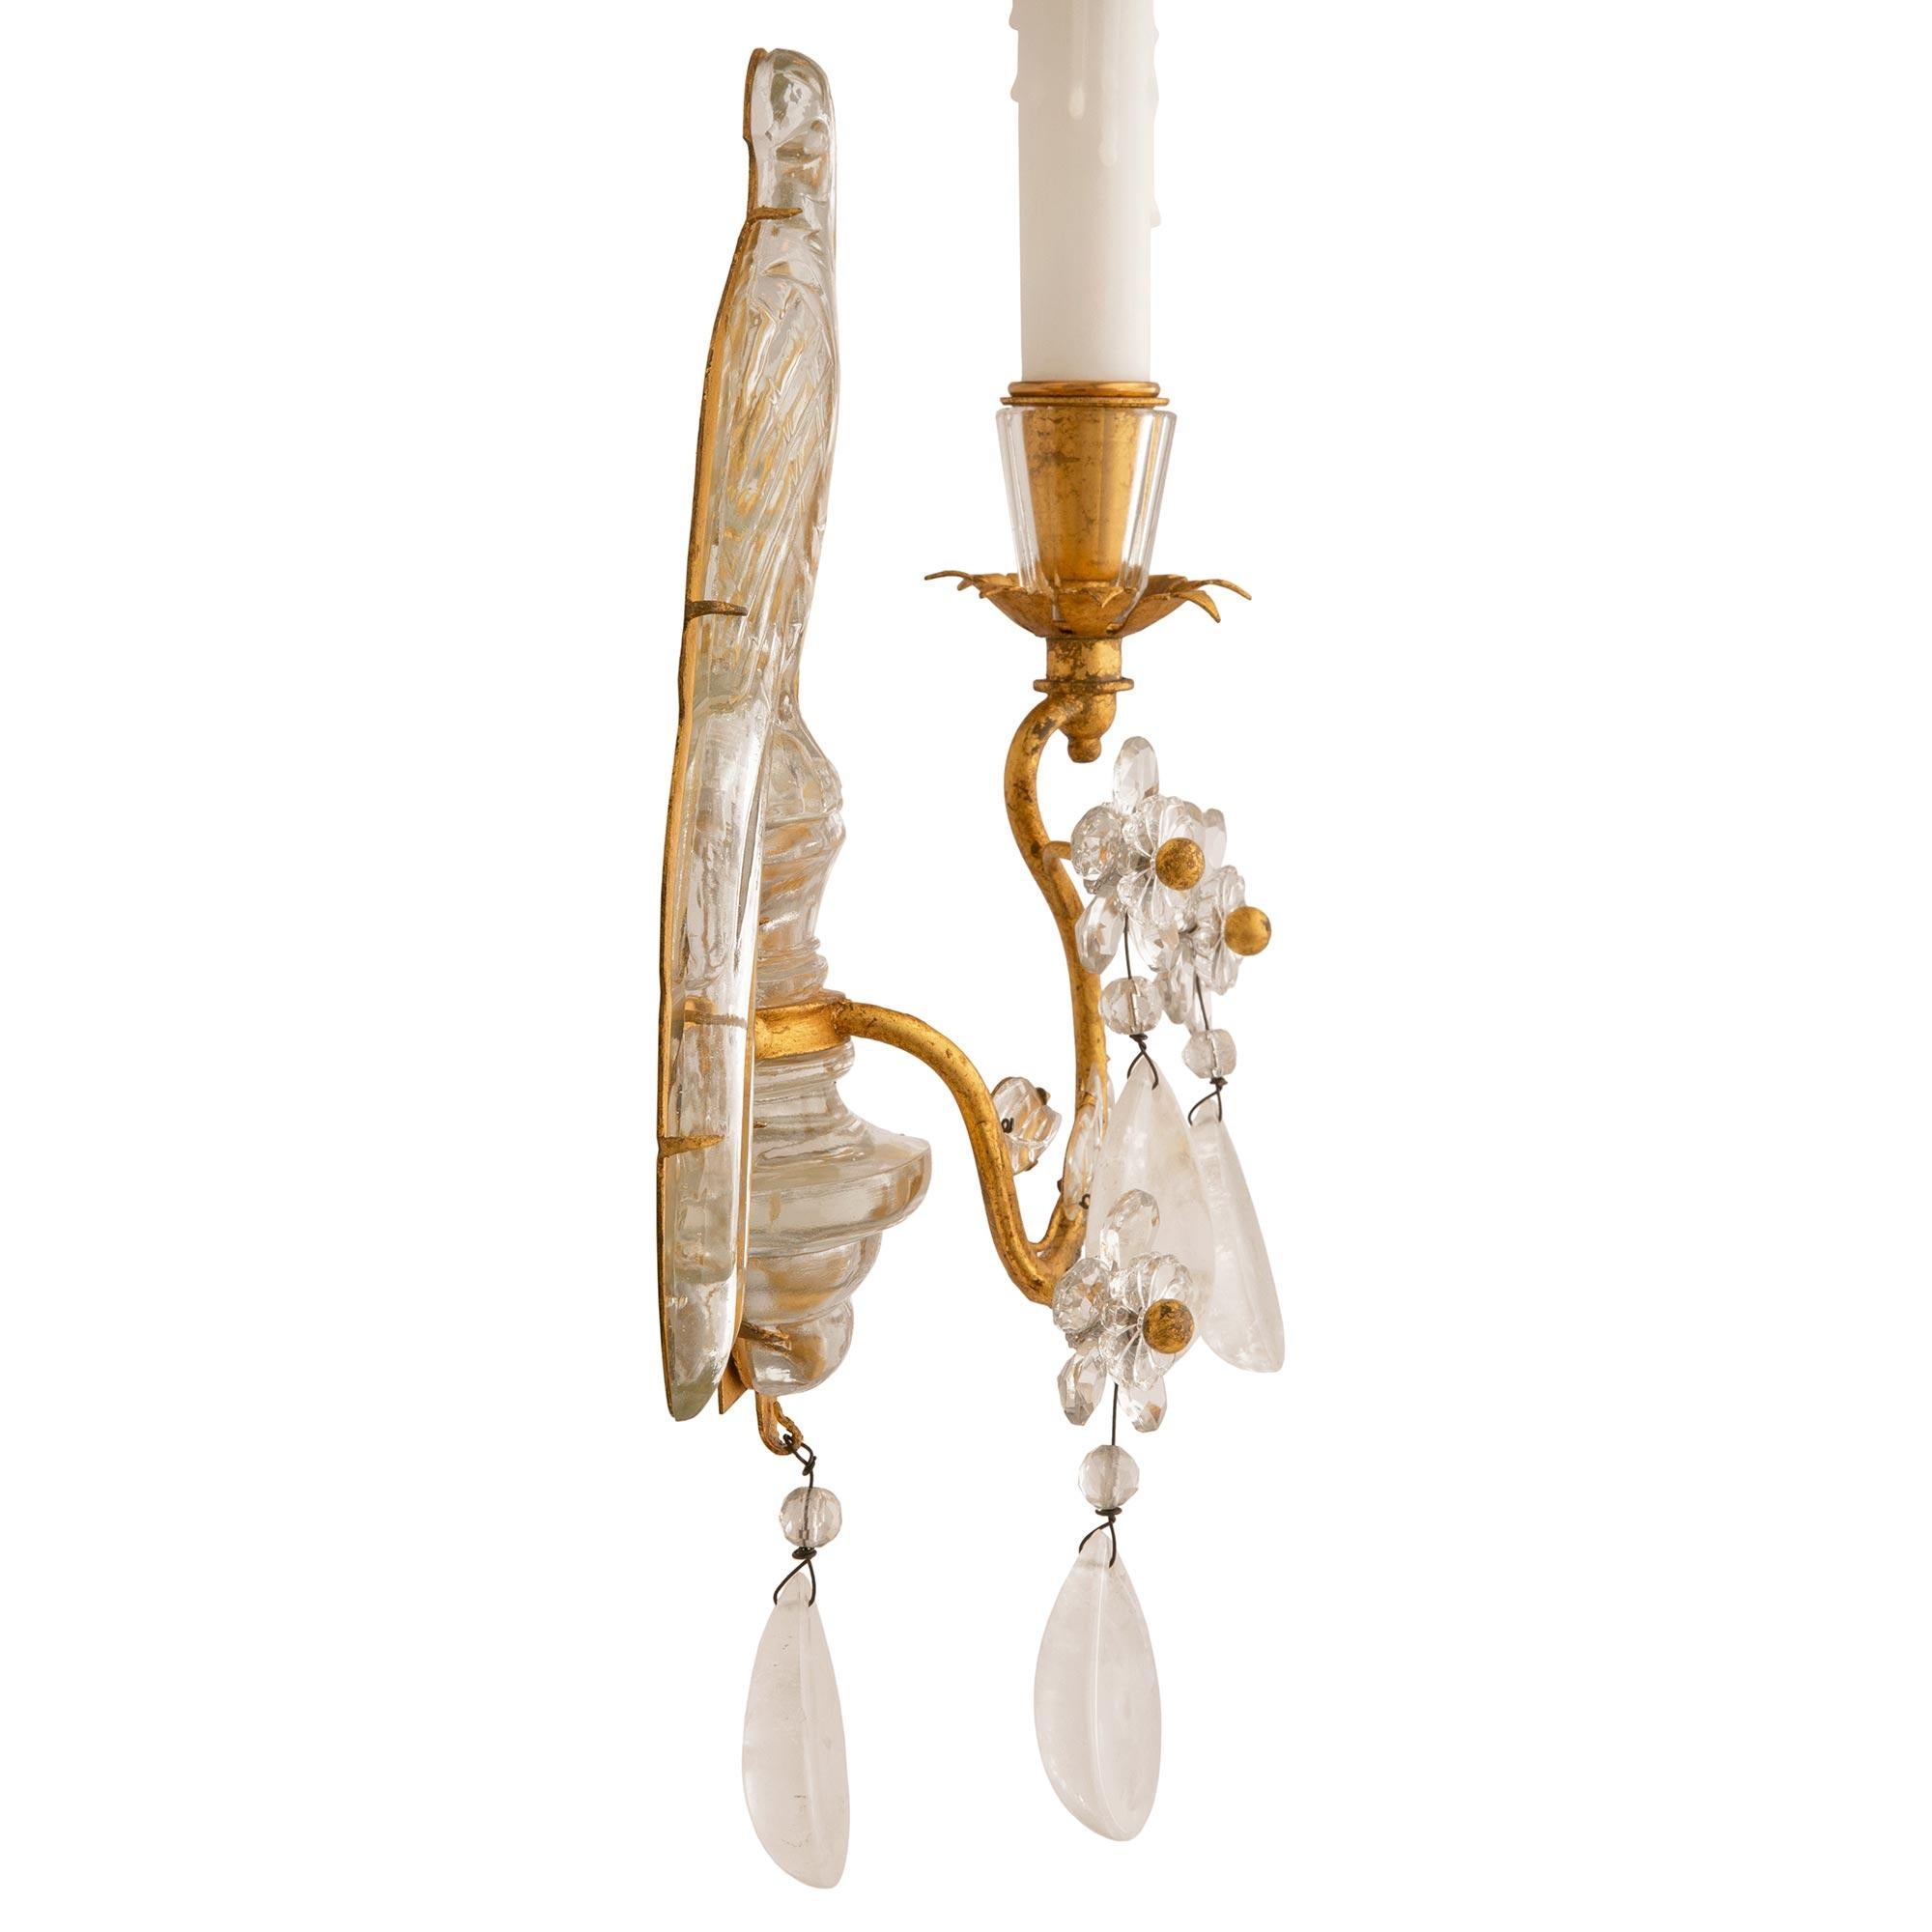 True Pair Of French 20th c. Louis XVI St. Rock Crystal And Gilt Metal Sconces In Good Condition For Sale In West Palm Beach, FL